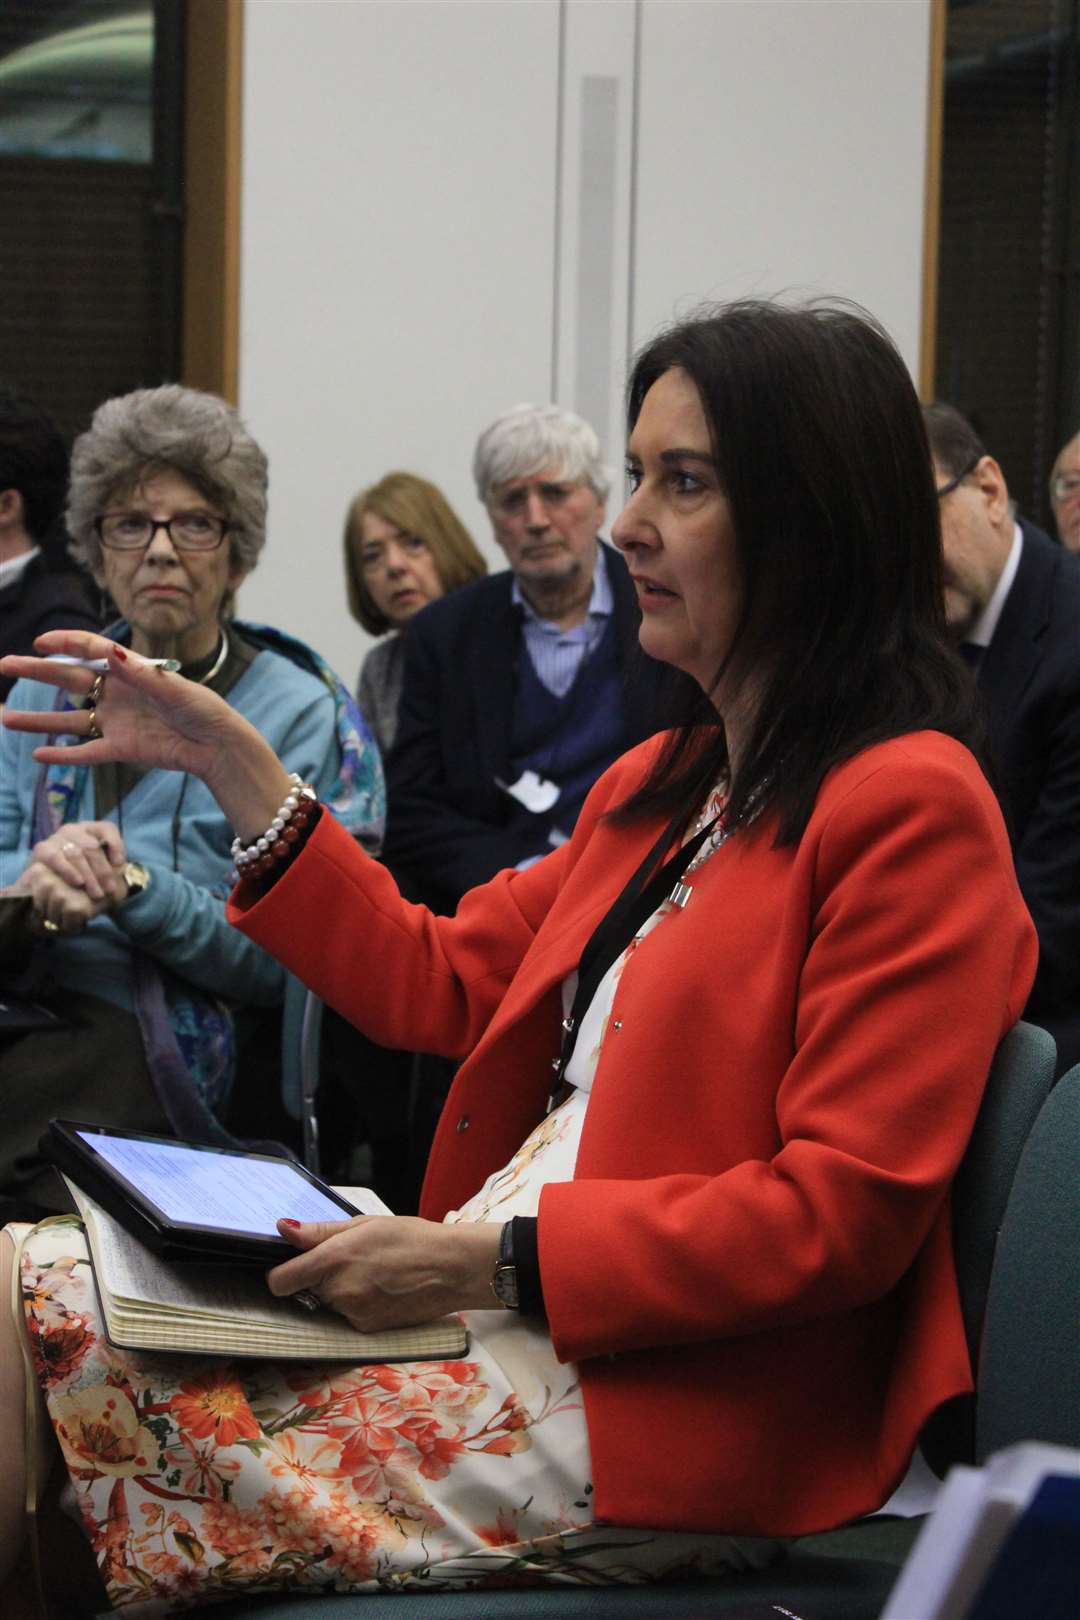 Margaret Ferrier MP. Picture: Nuclear Information Service from Reading, United Kingdom / CC BY-SA (https://creativecommons.org/licenses/by-sa/2.0).